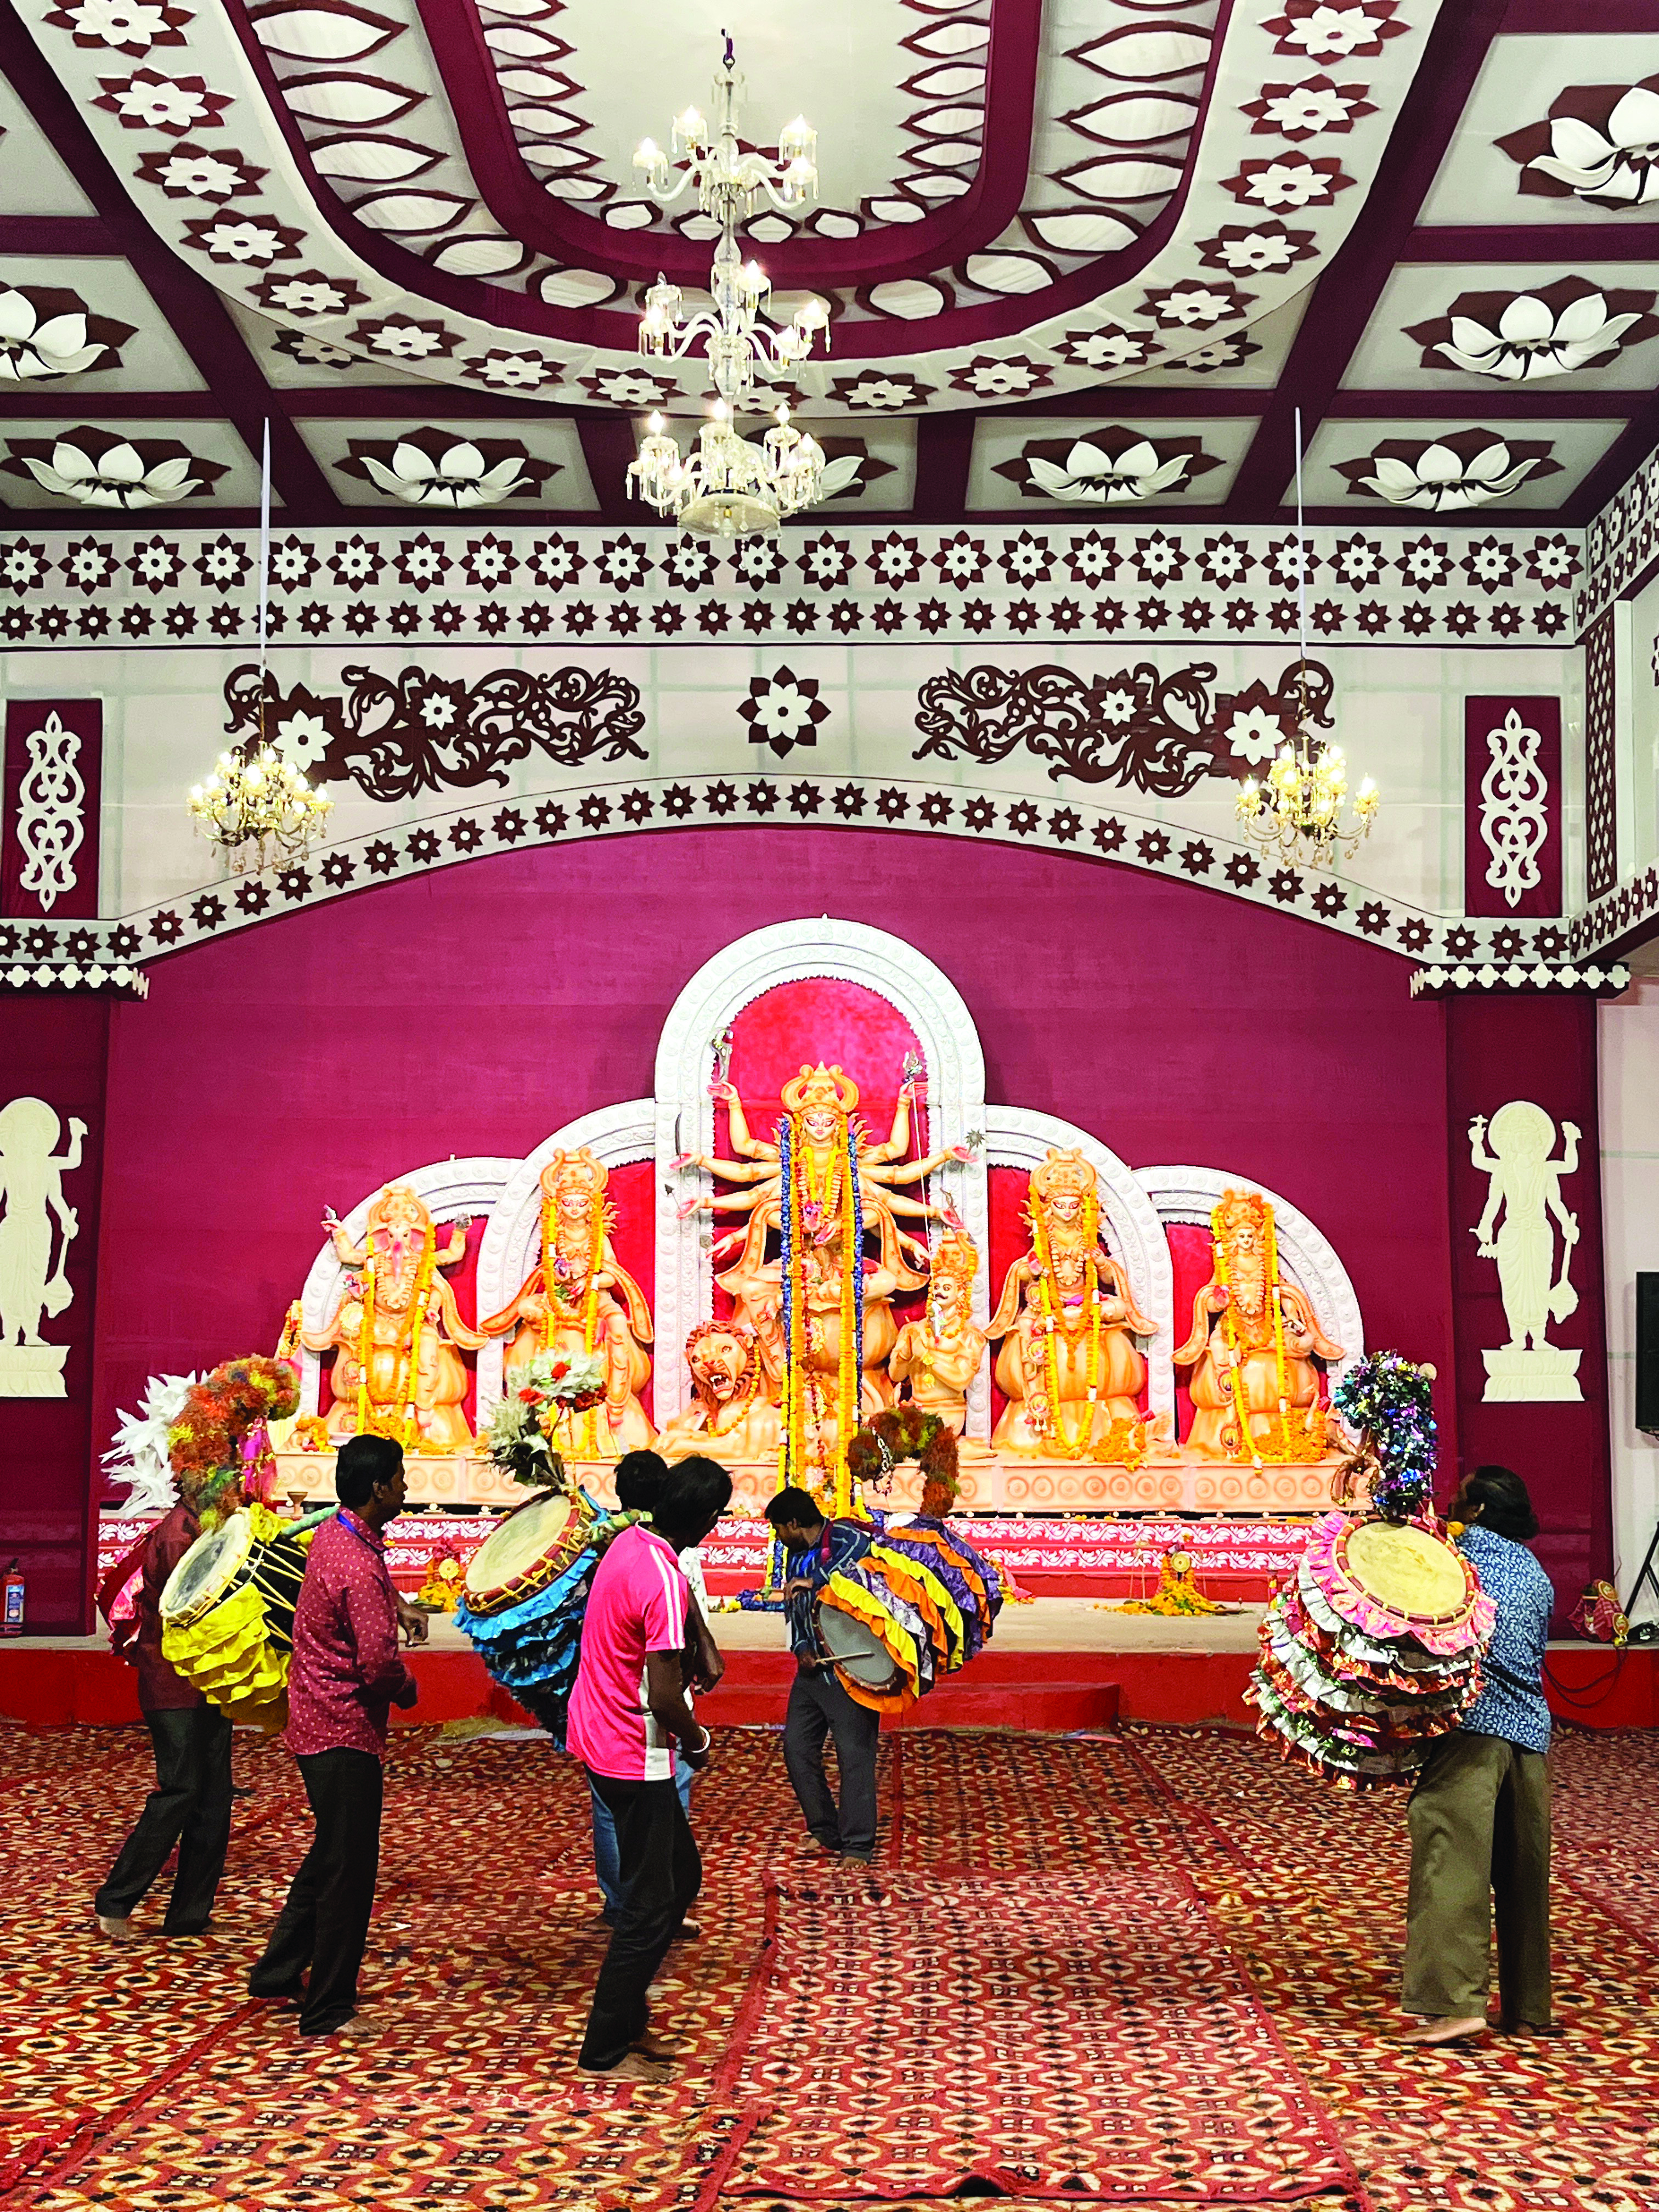 CR Park witnesses a turnout of over 100,000 devotees during Durga Puja  celebrations